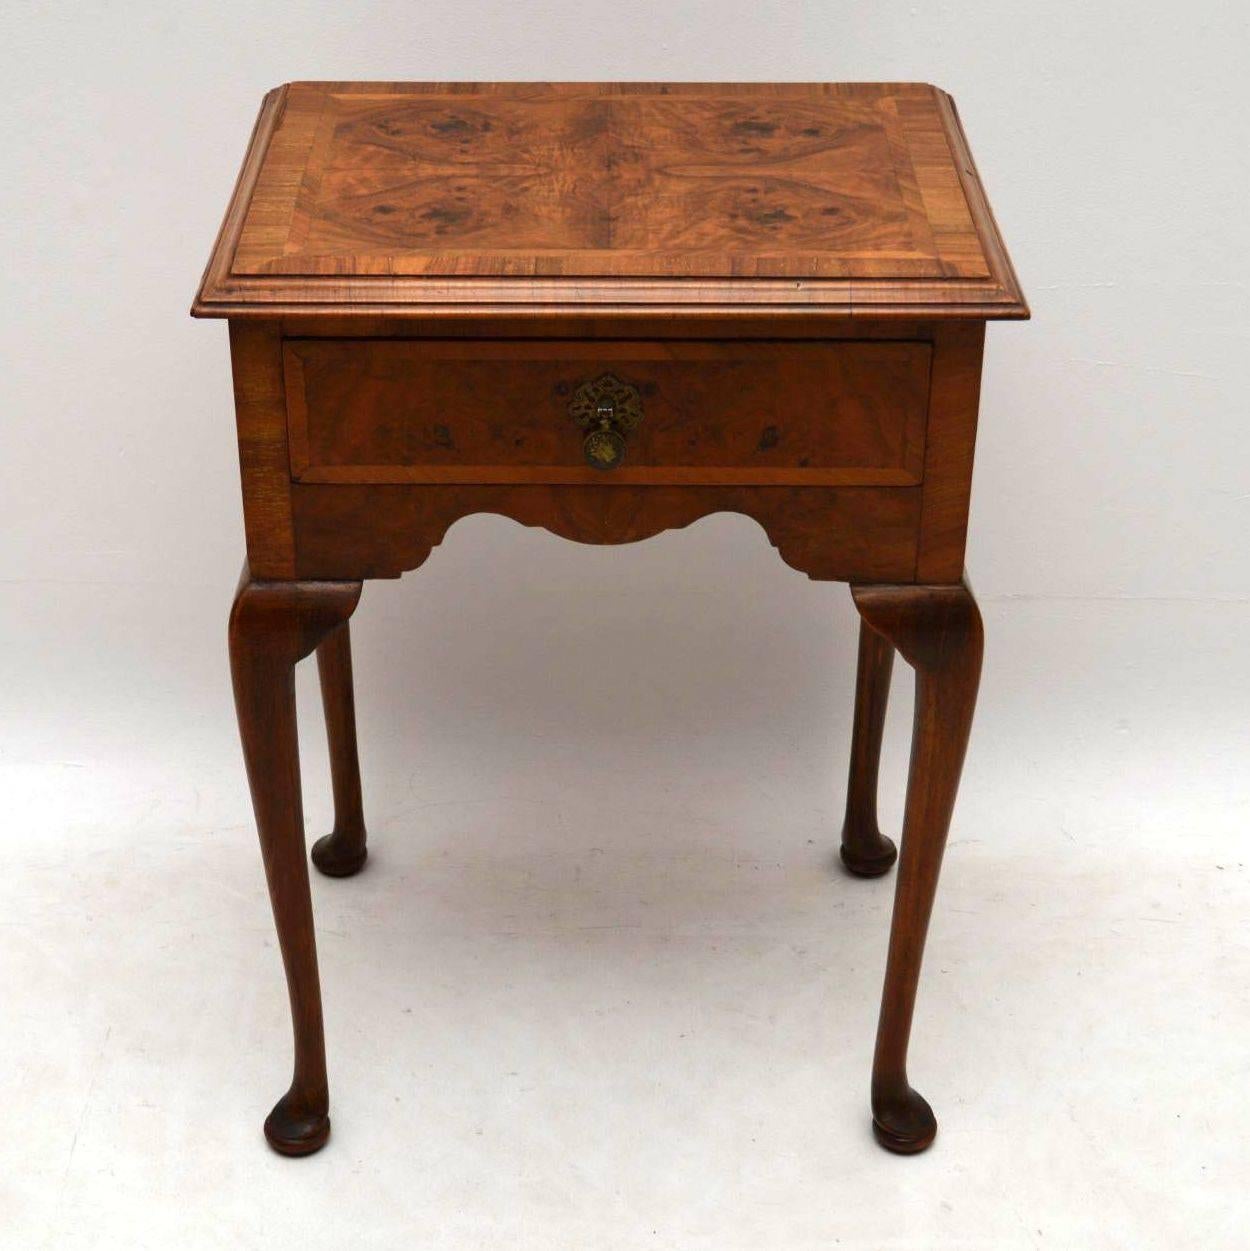 Small antique walnut side table with one drawer, a polished back and sitting on solid walnut legs. The top is a densely patterned burr walnut, with herringbone inlay and figured walnut crossbanding, plus a moulded walnut edge. The drawer is also